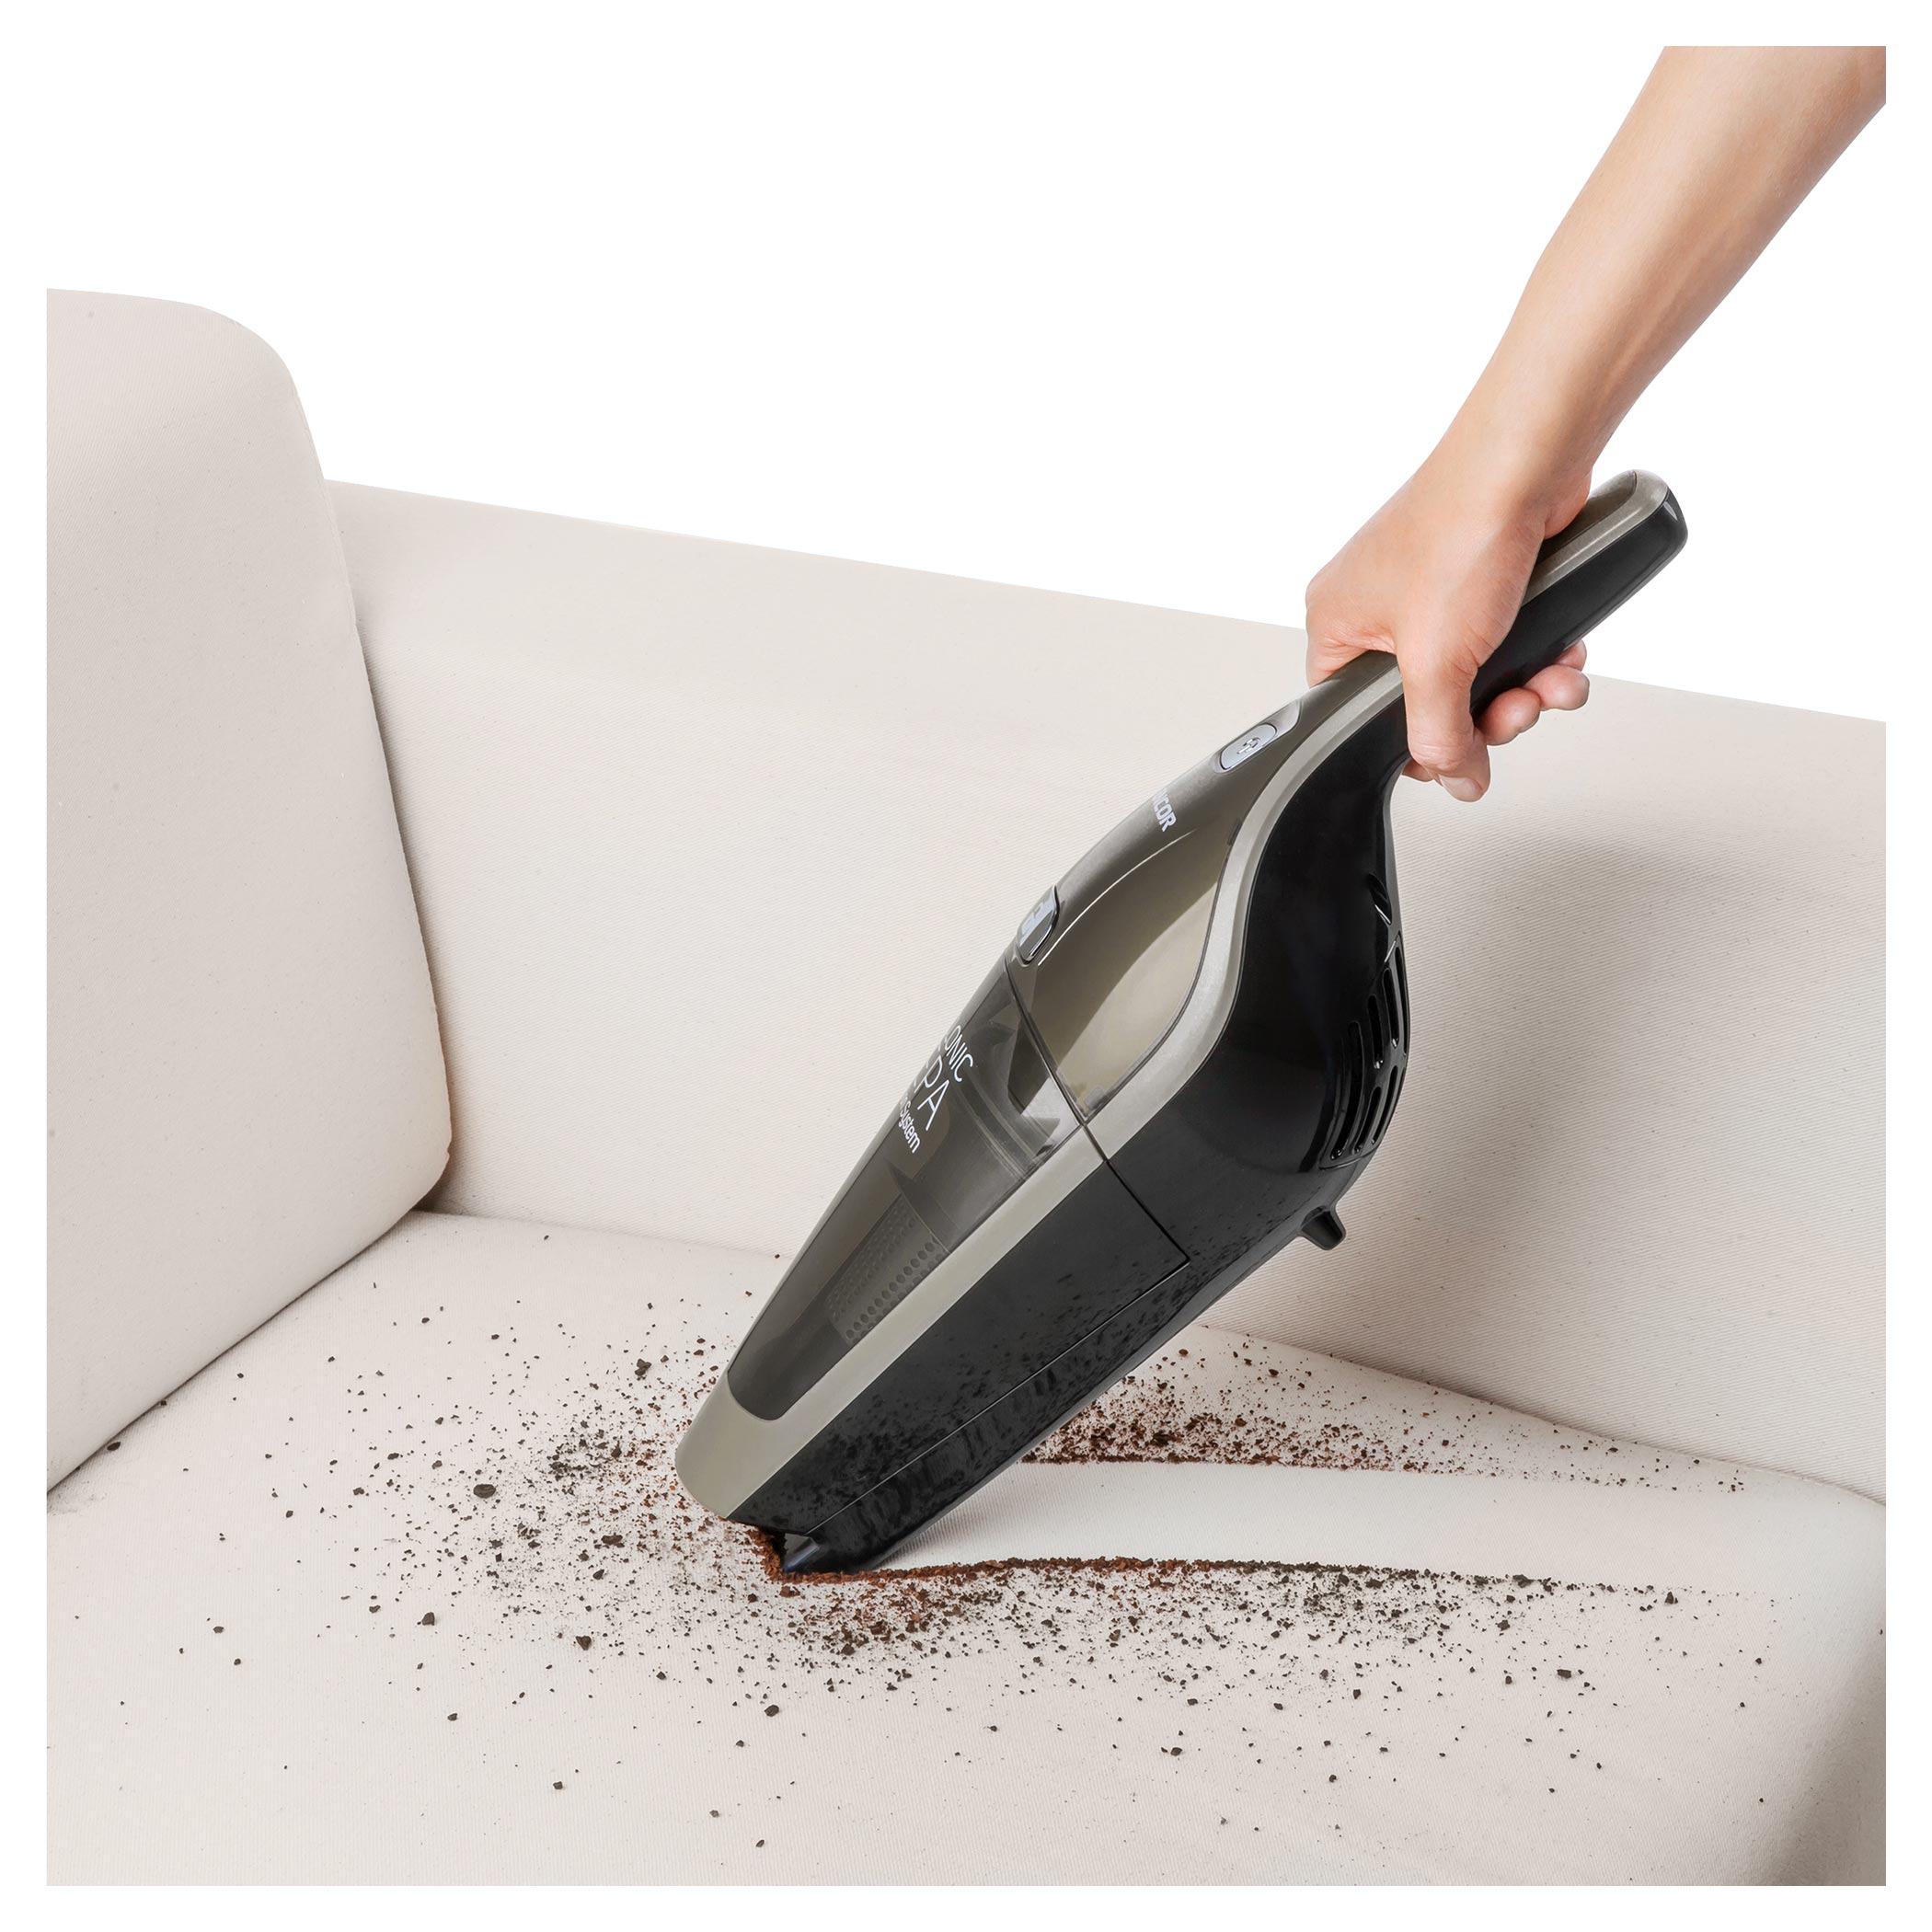 2-in-1 Stick Handheld Vacuum Cleaner Cordless Rechargeable Bagless HEPA Filter 